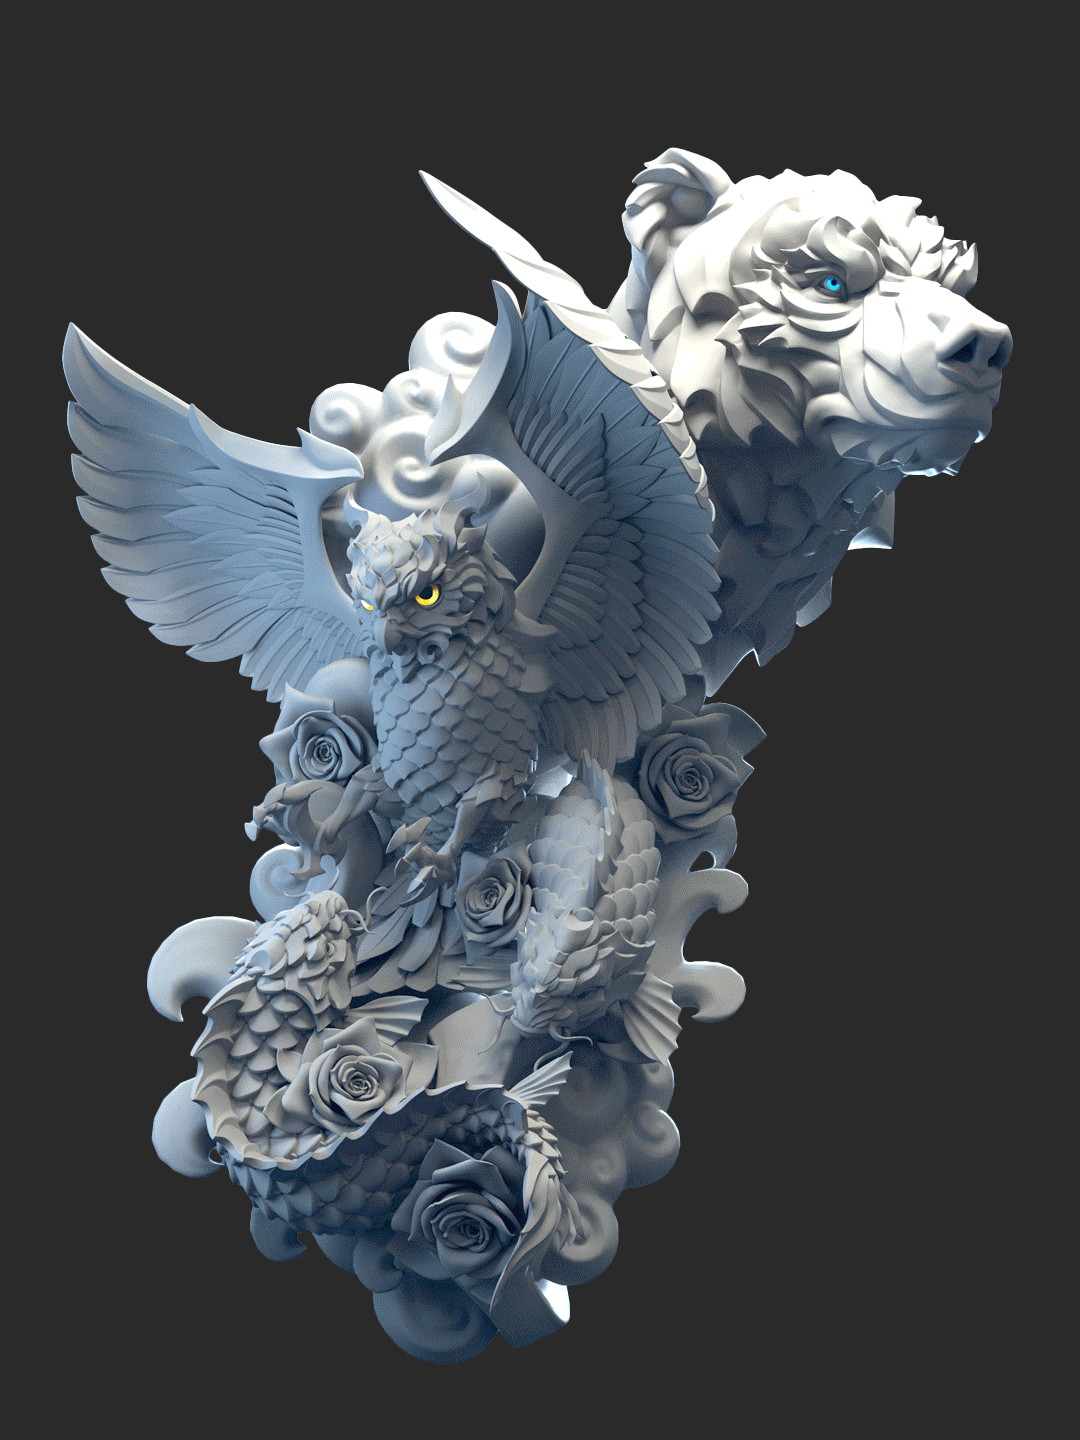 The feeling of clay sculpting - ZBrushCentral